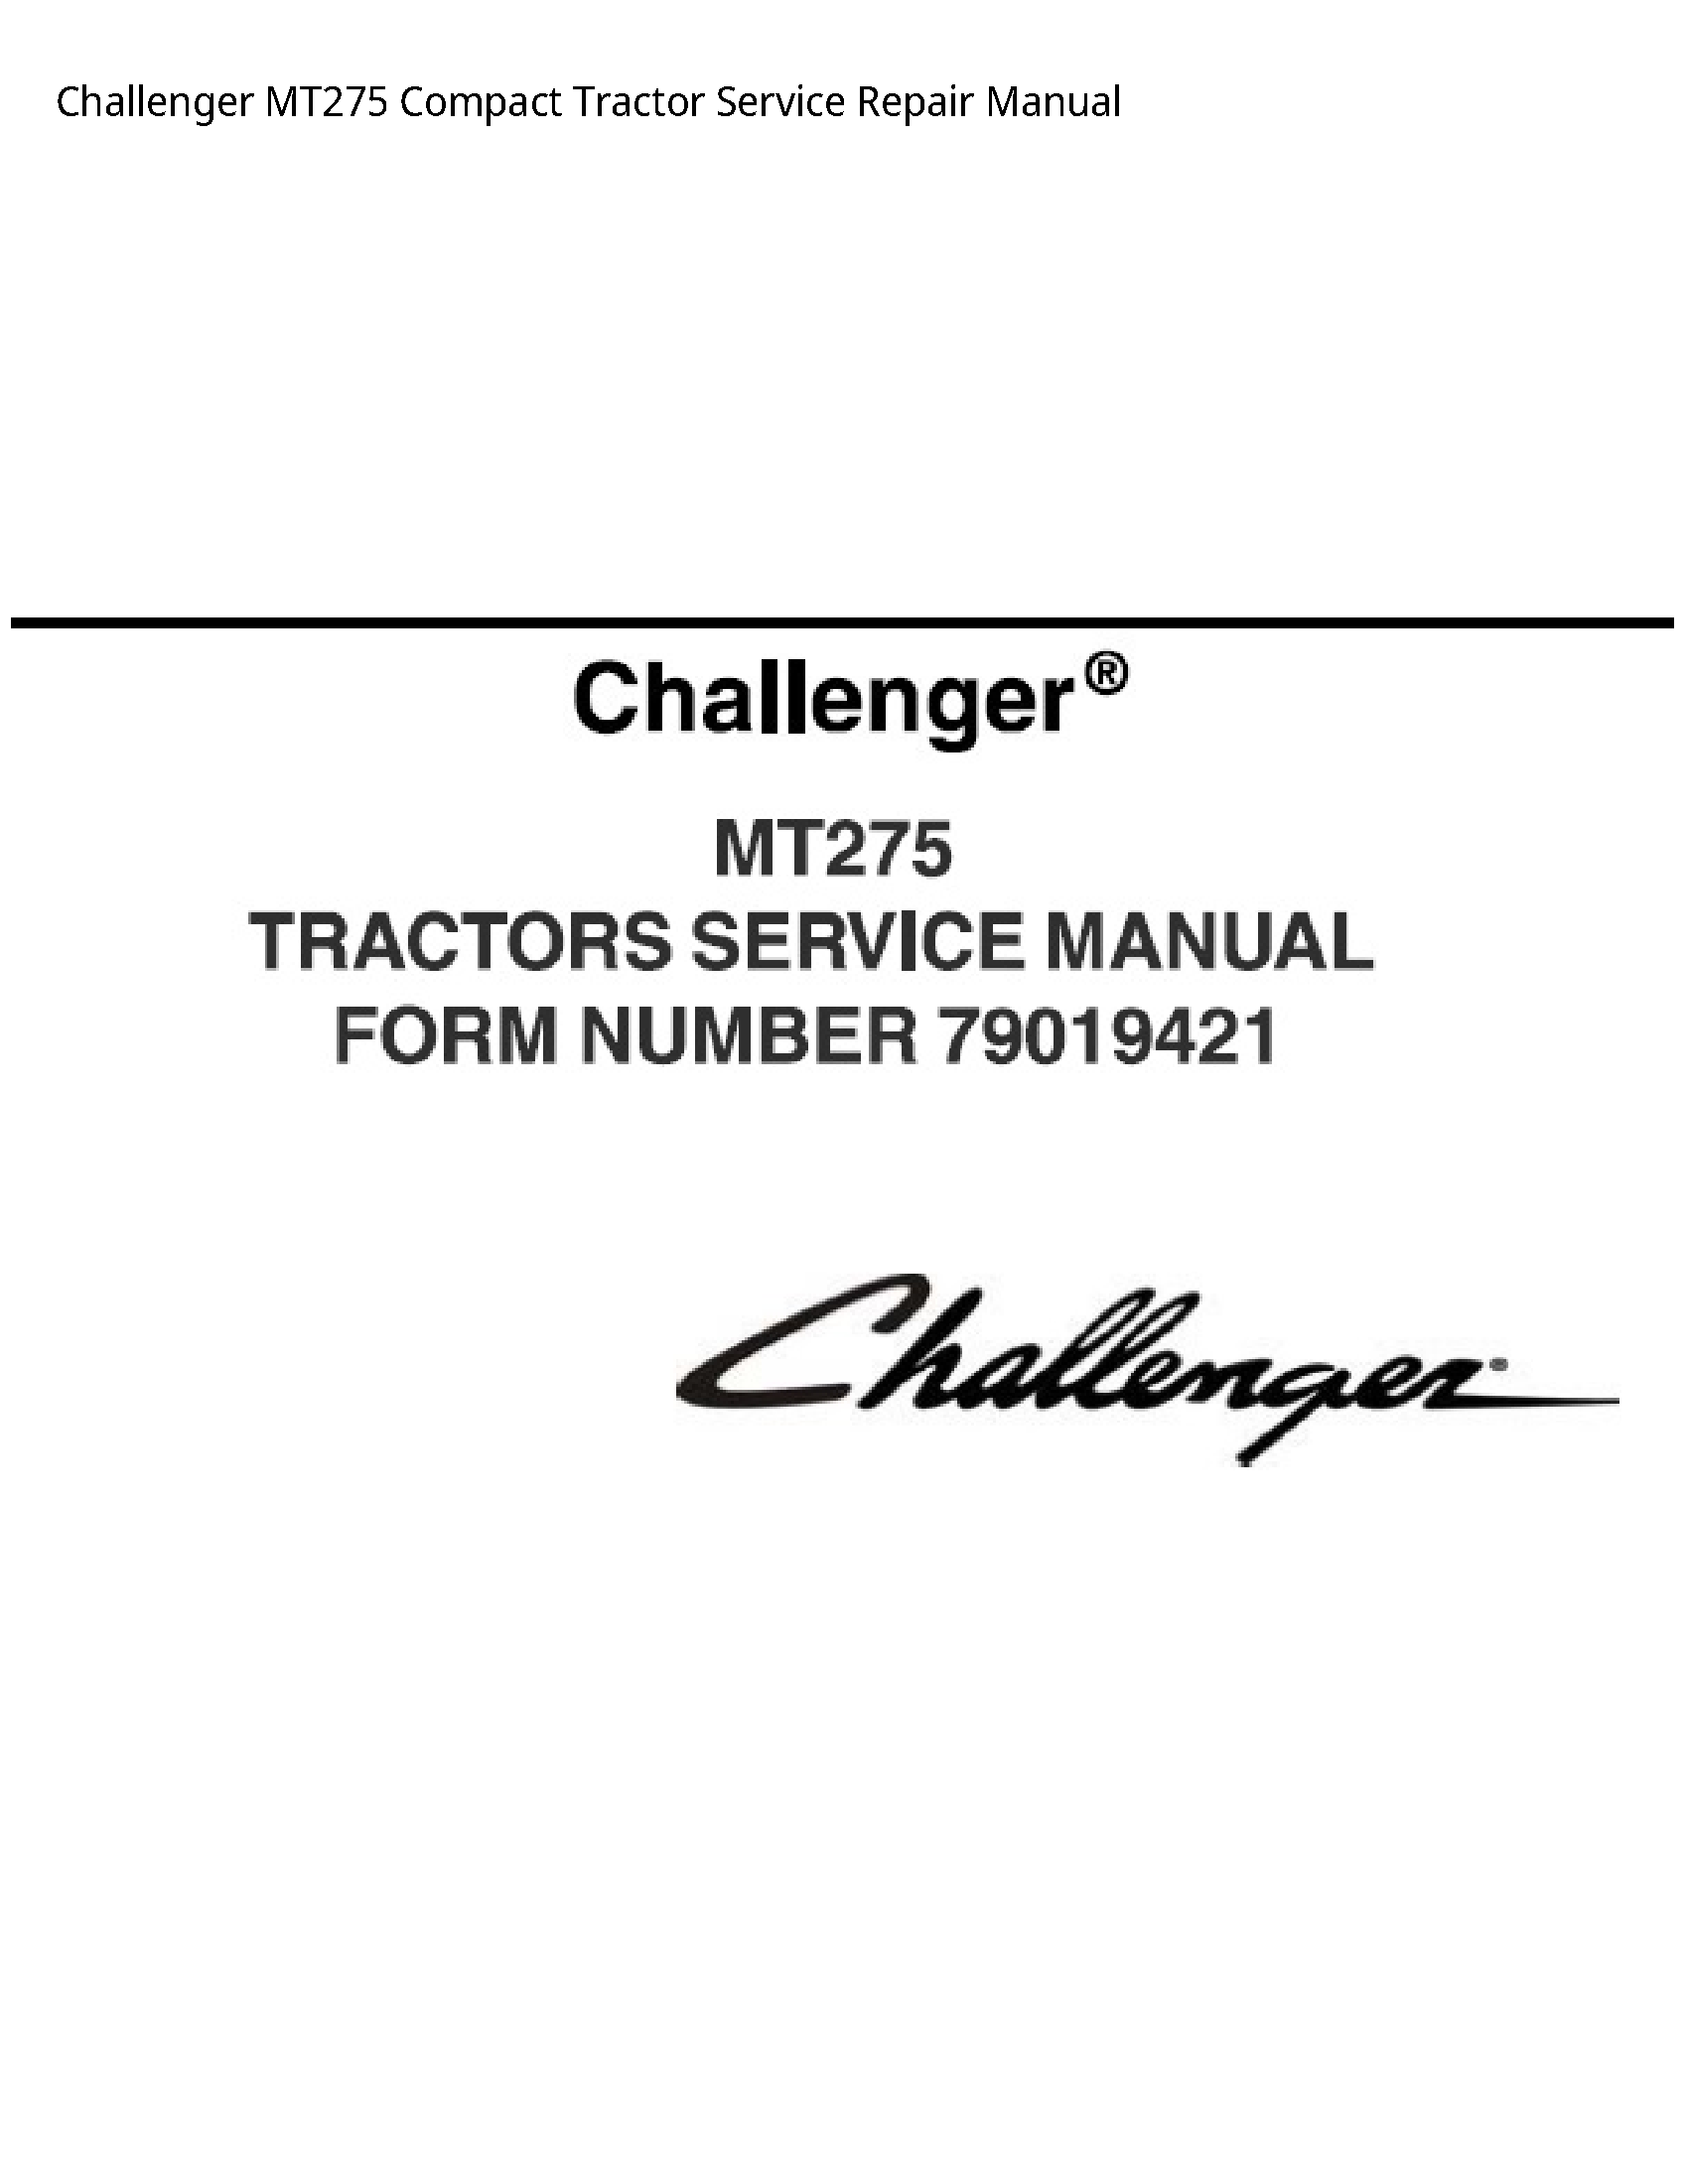 Challenger MT275 Compact Tractor manual